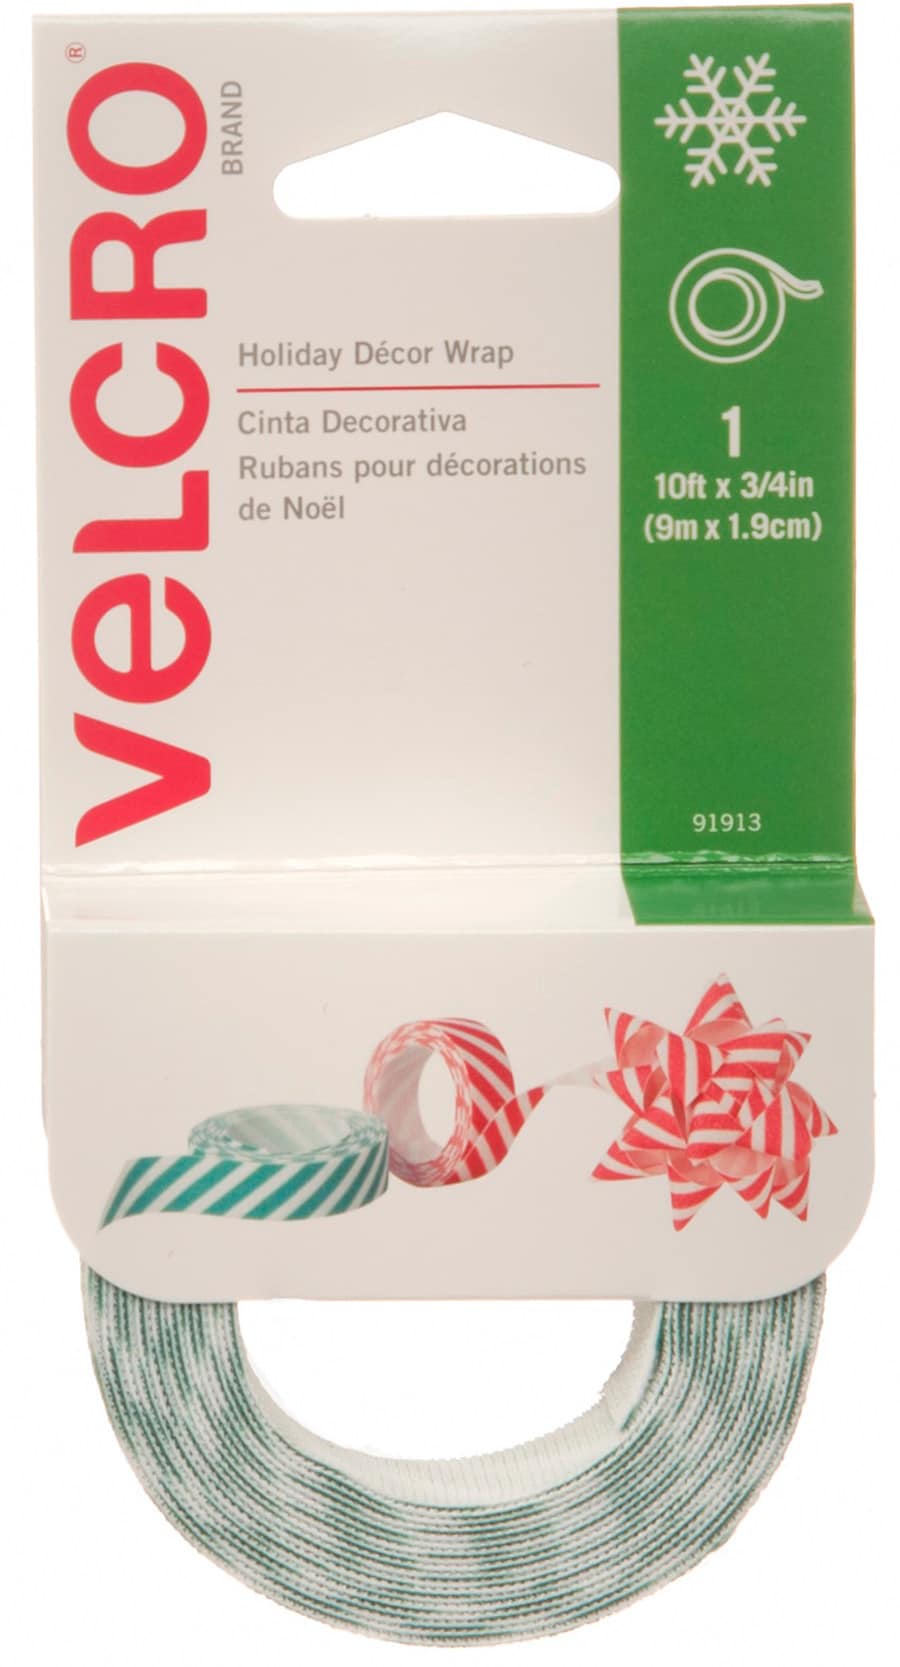 VELCRO Brand 120-in Eco Collection Tape 10Ft X 7/8In Hook and Loop